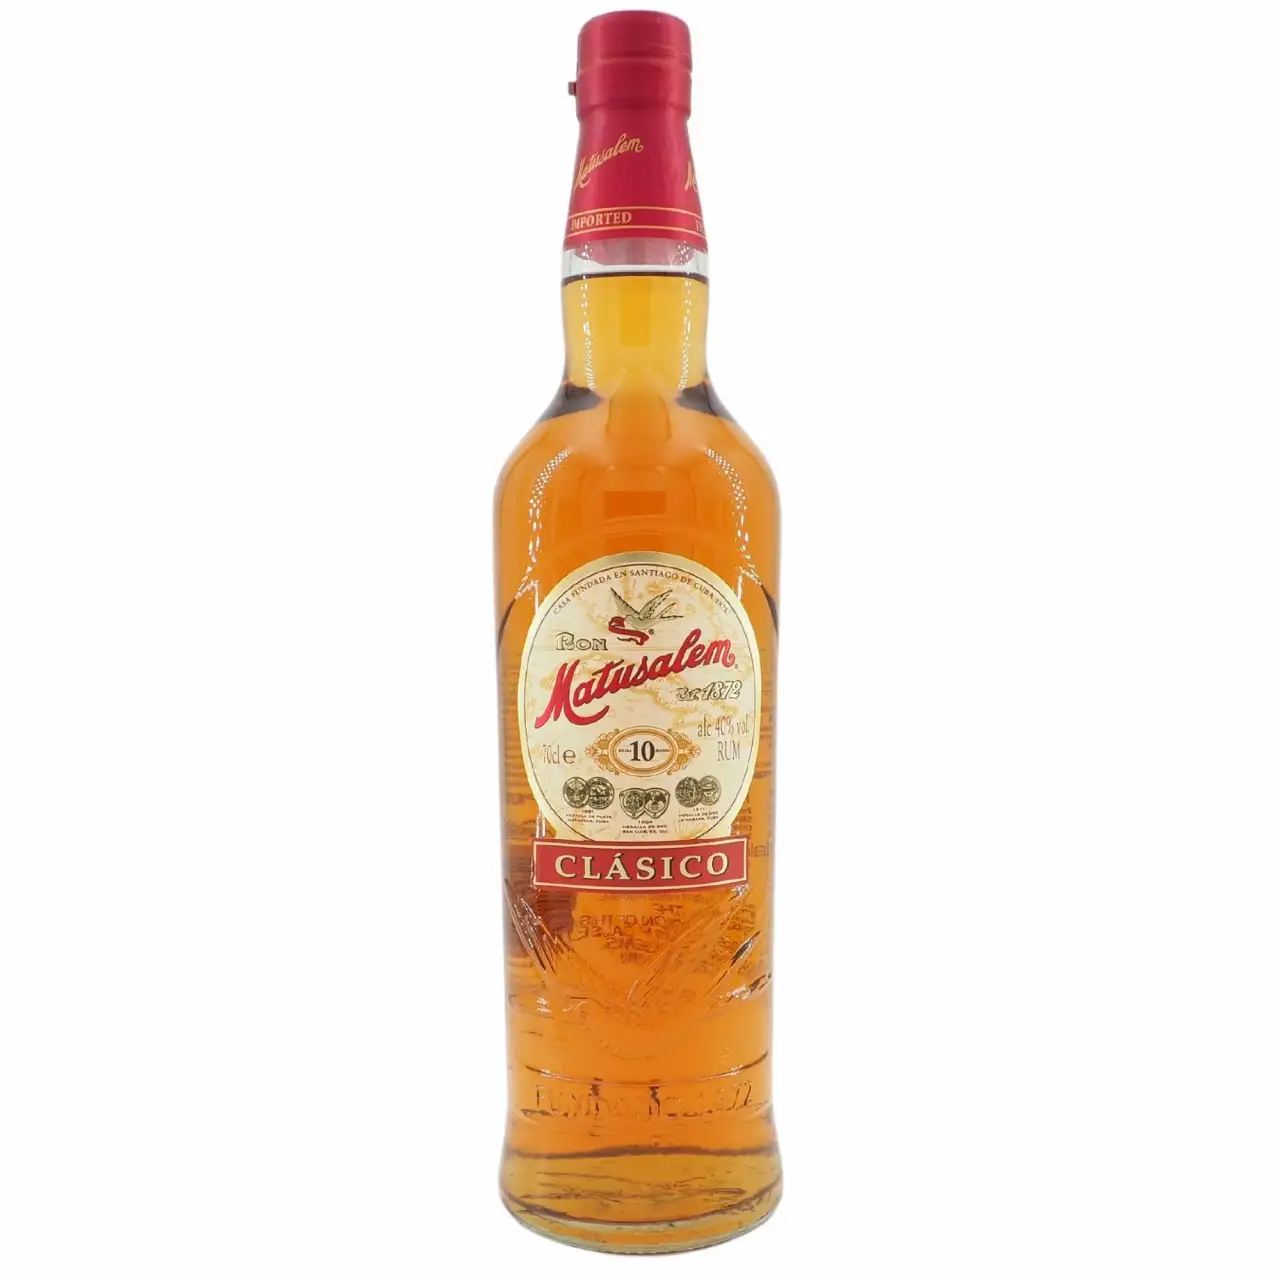 Image of the front of the bottle of the rum Clásico